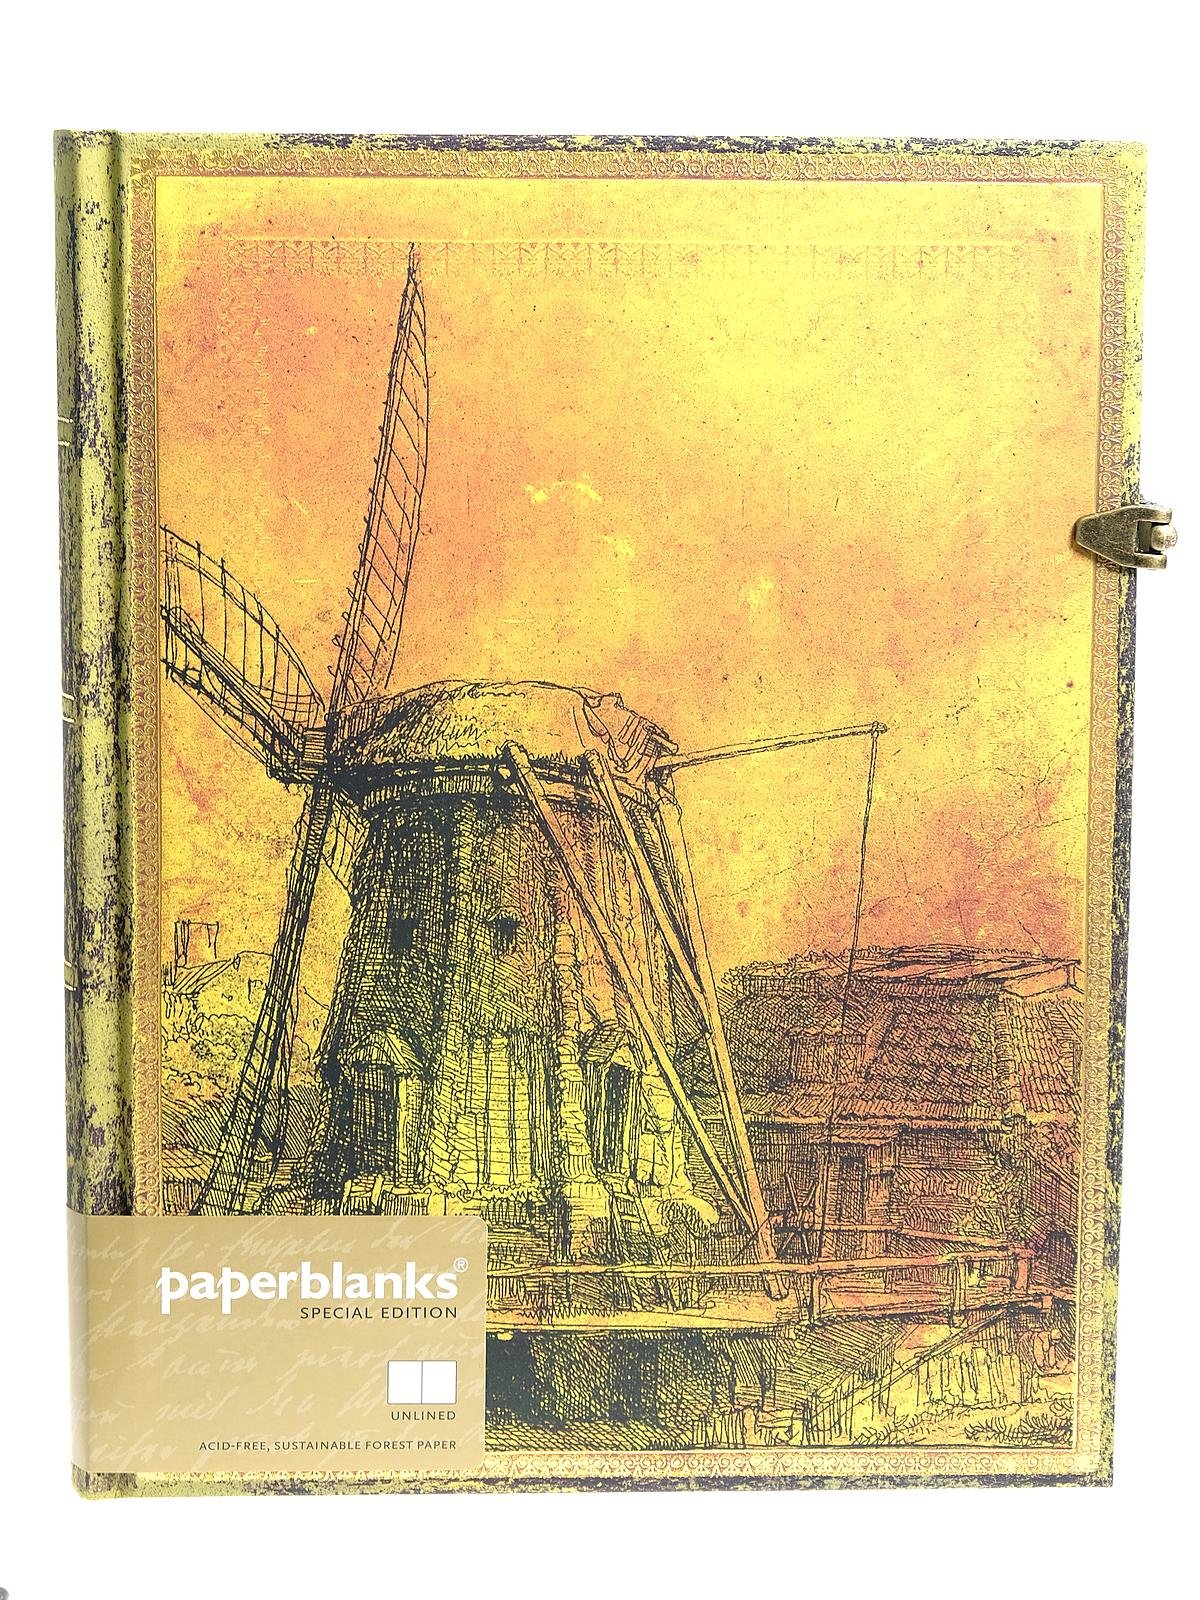 Paperblanks - Rembrandt's 350th Anniversary